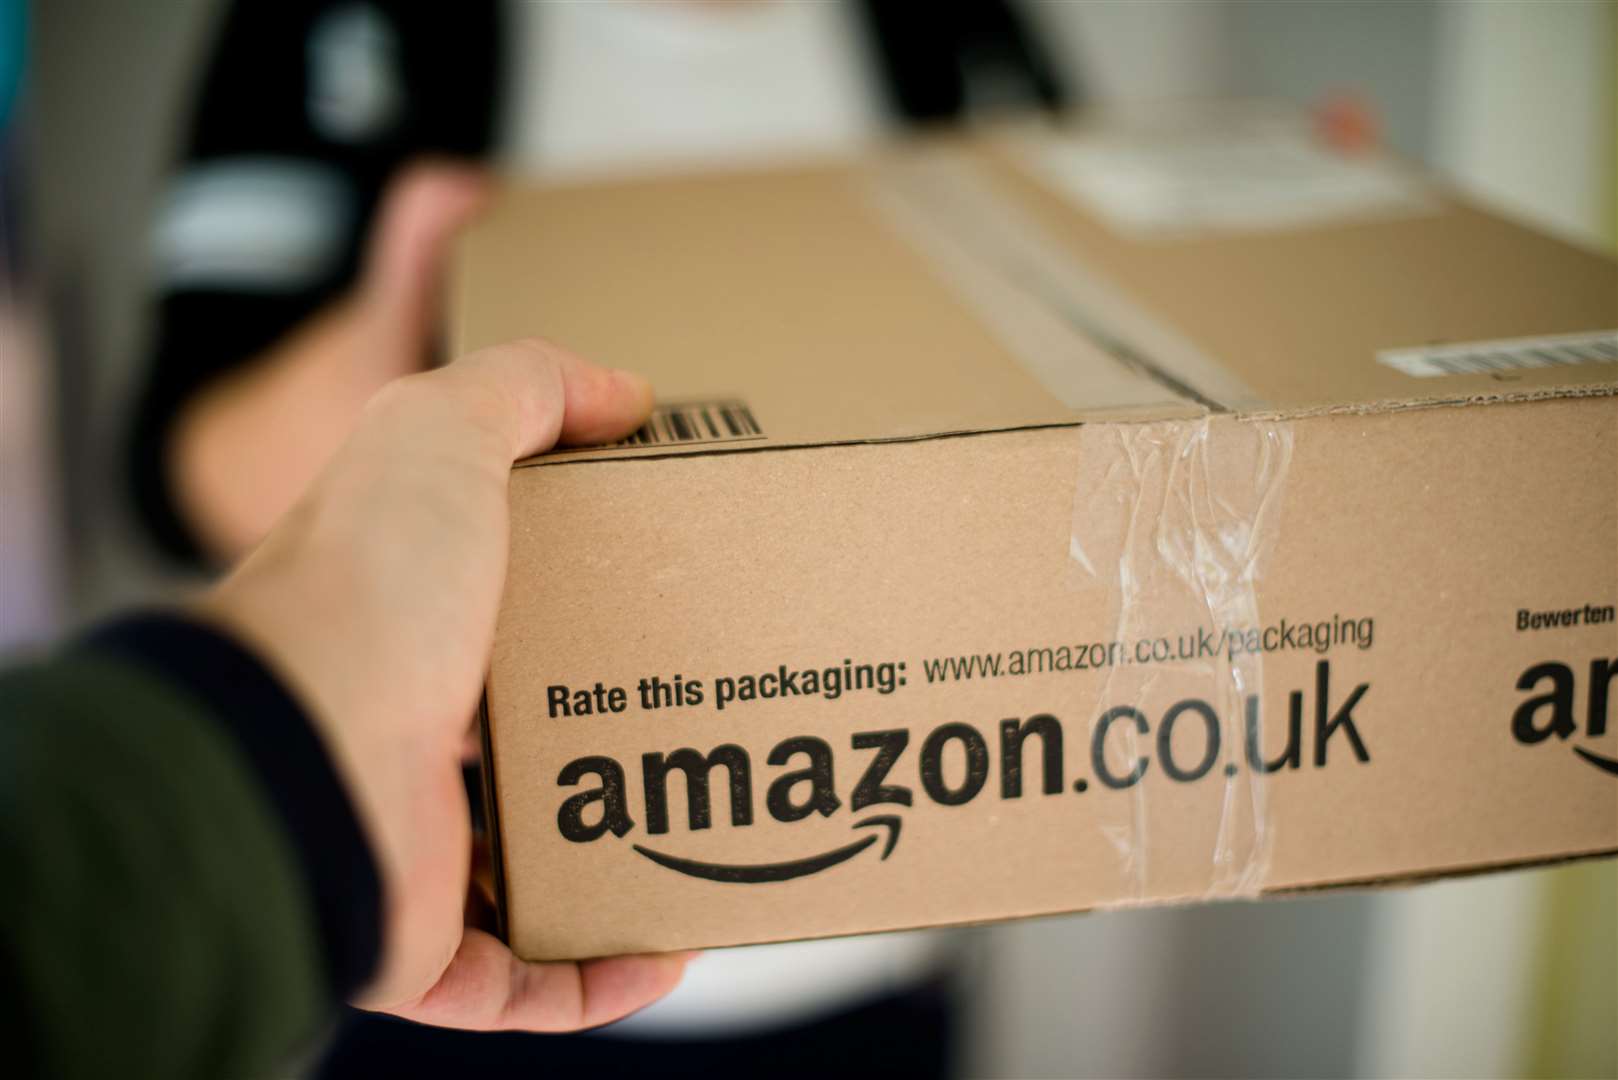 Amazon Prime members get a range of benefits for their subscription fee. Image: iStock.